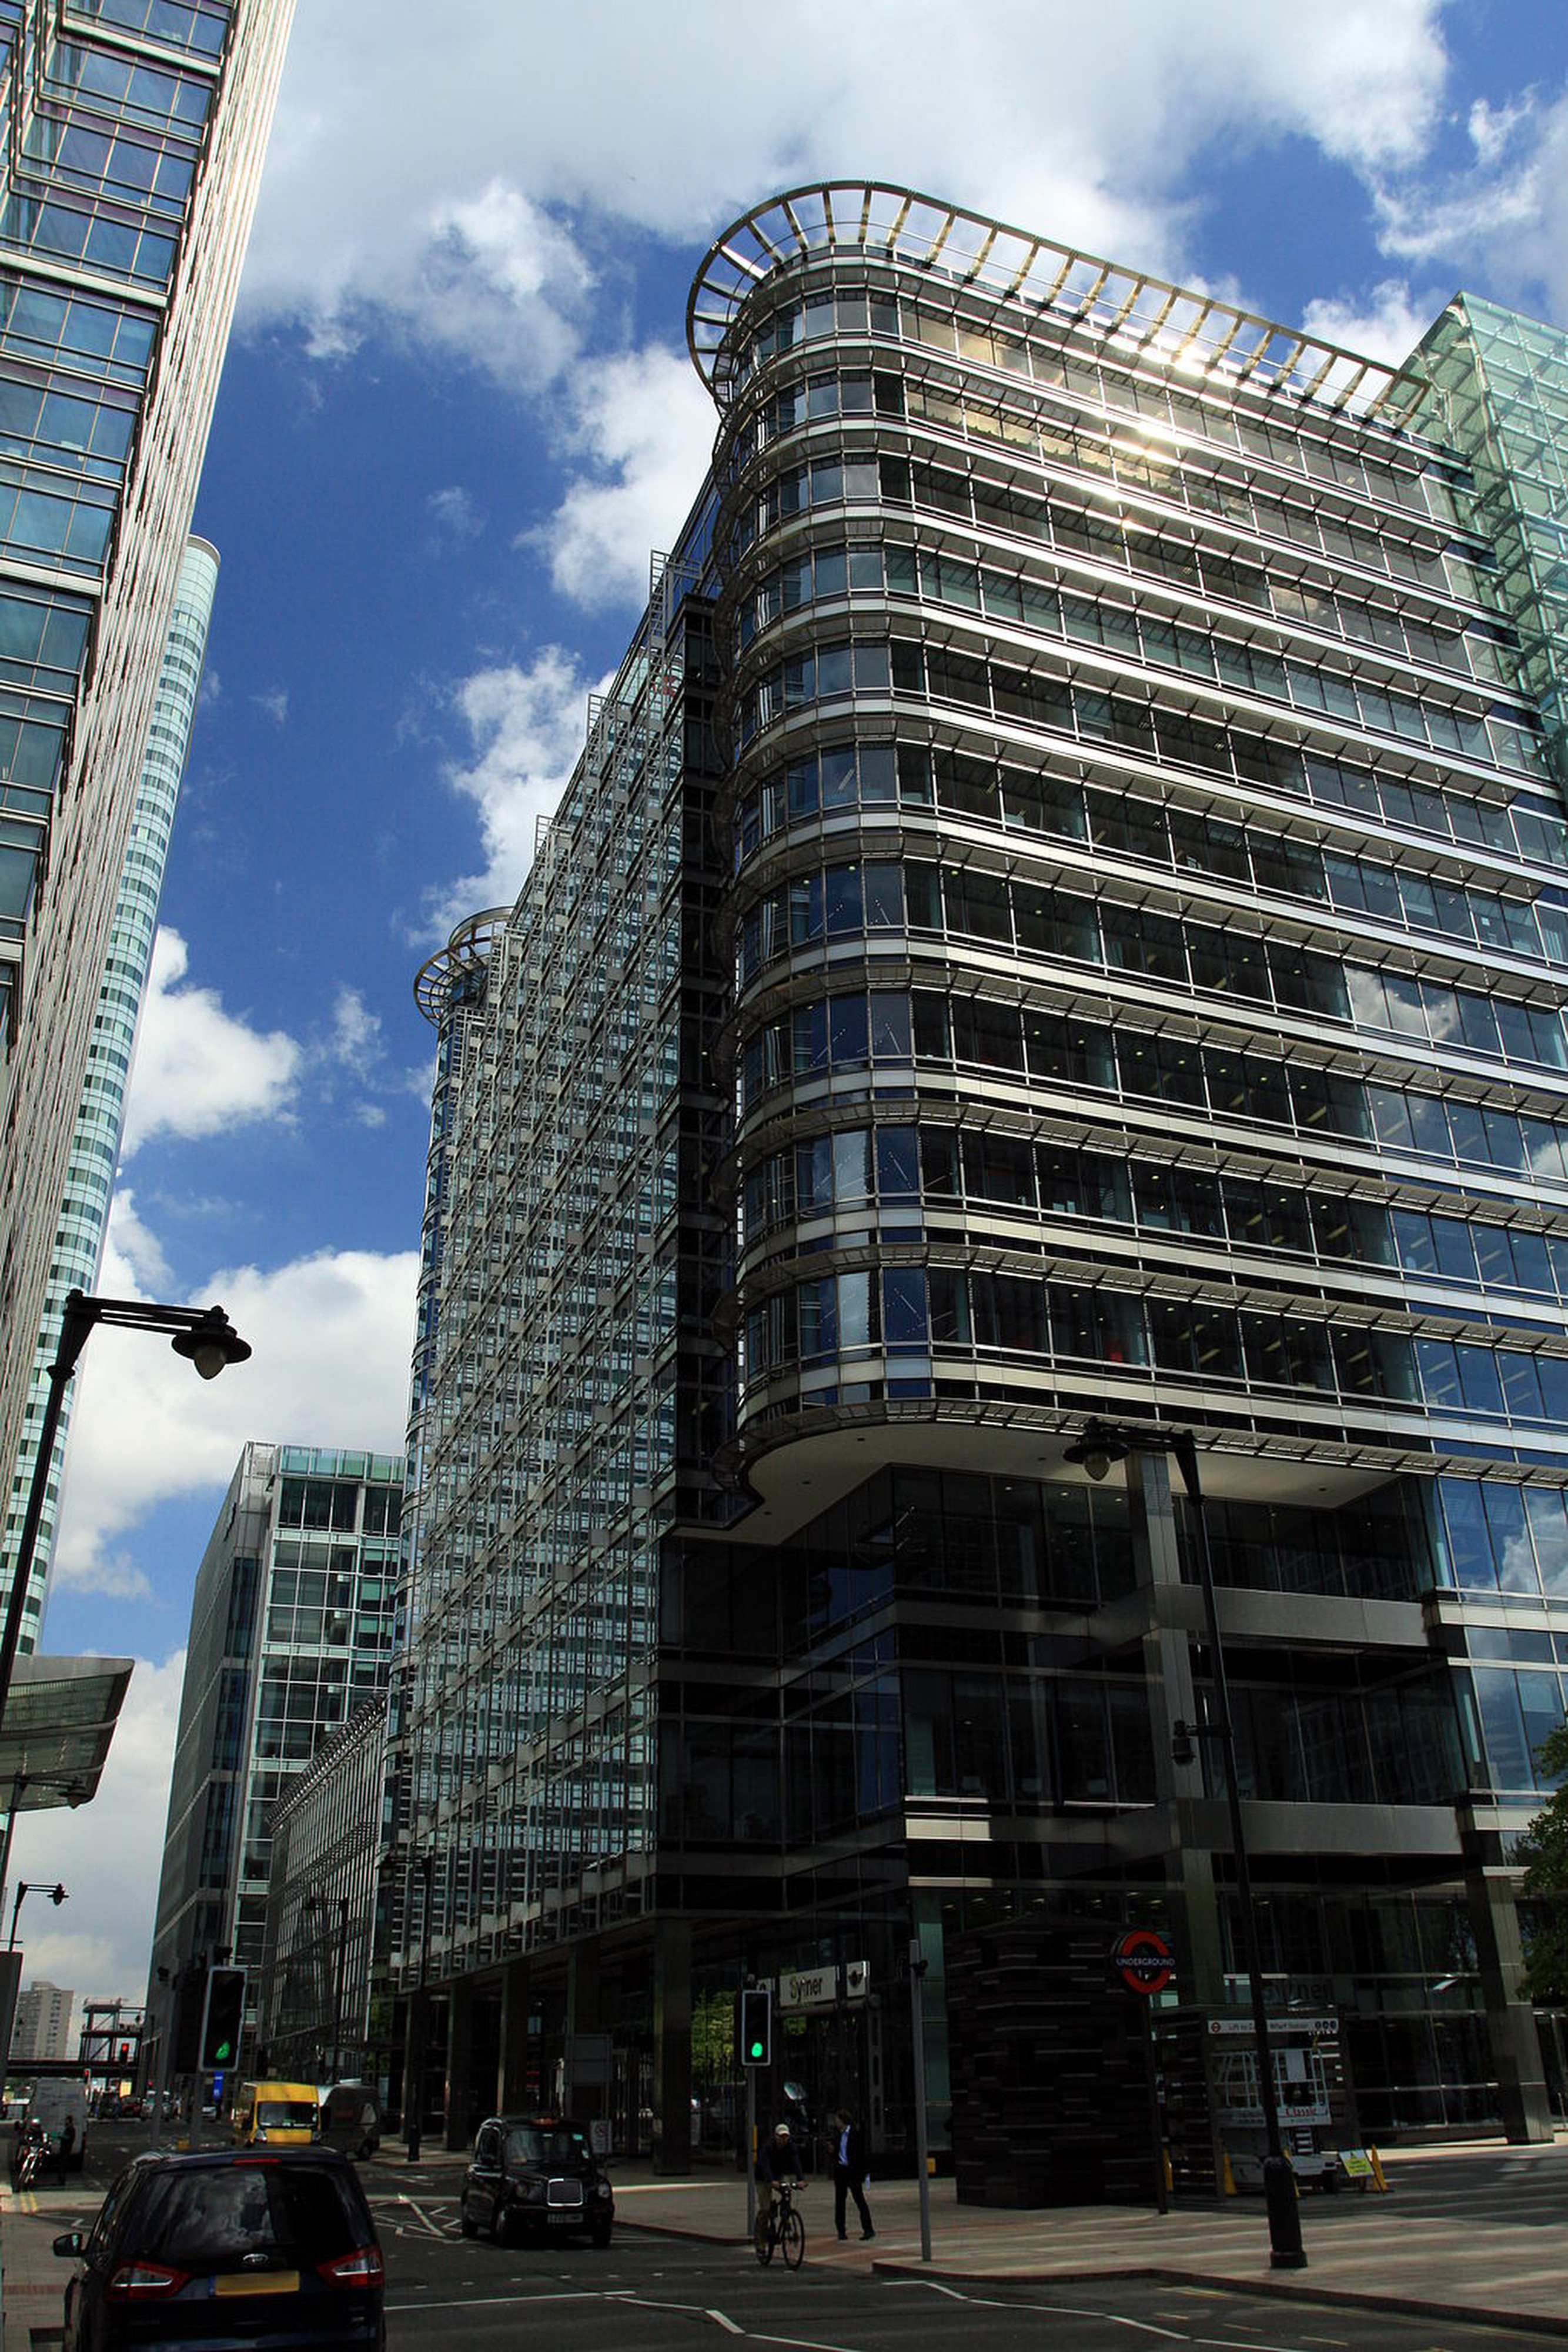 20 Canada Square from Upper Bank Street in London Borough of Tower Hamlets, London, England, Great Britain.